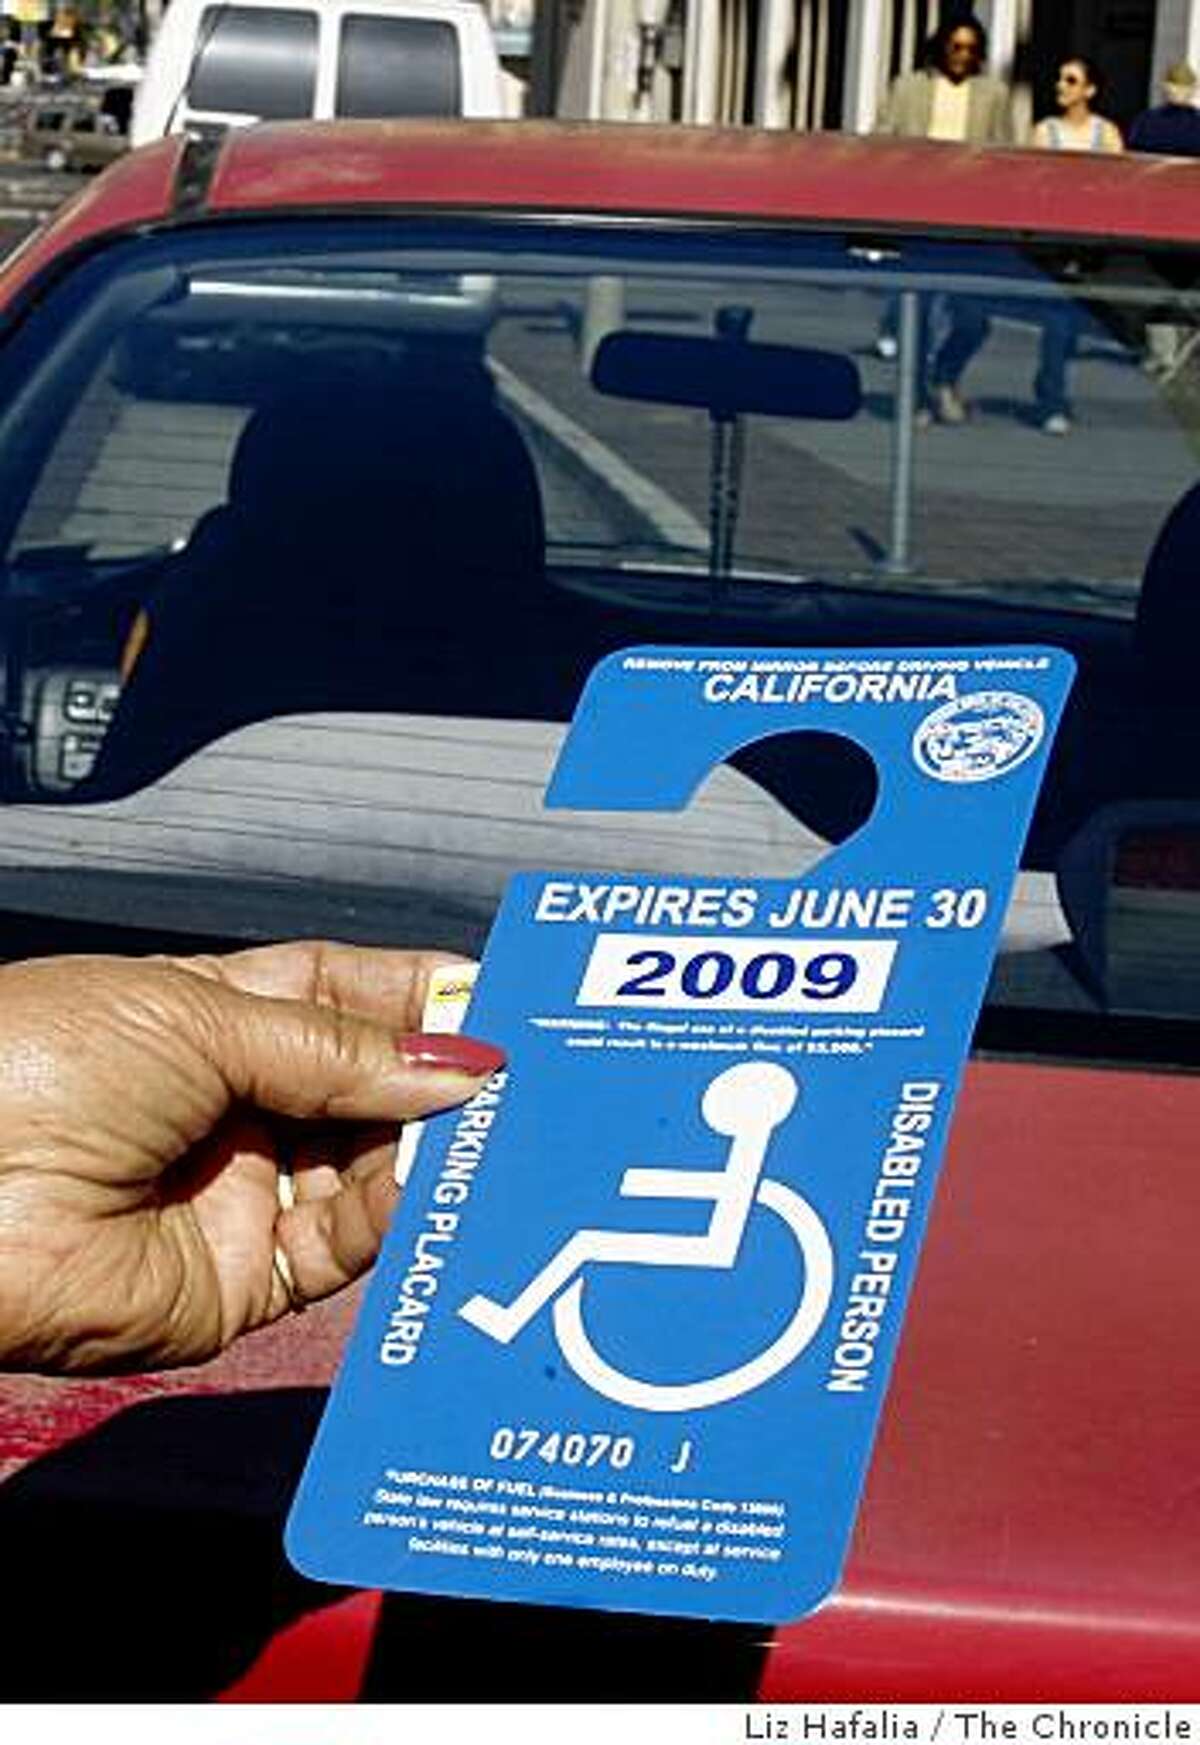 Eufrencia Lactaoeu,72 years old, shows her disabled placard while parked on Mission St. between 5th and 6th streets.